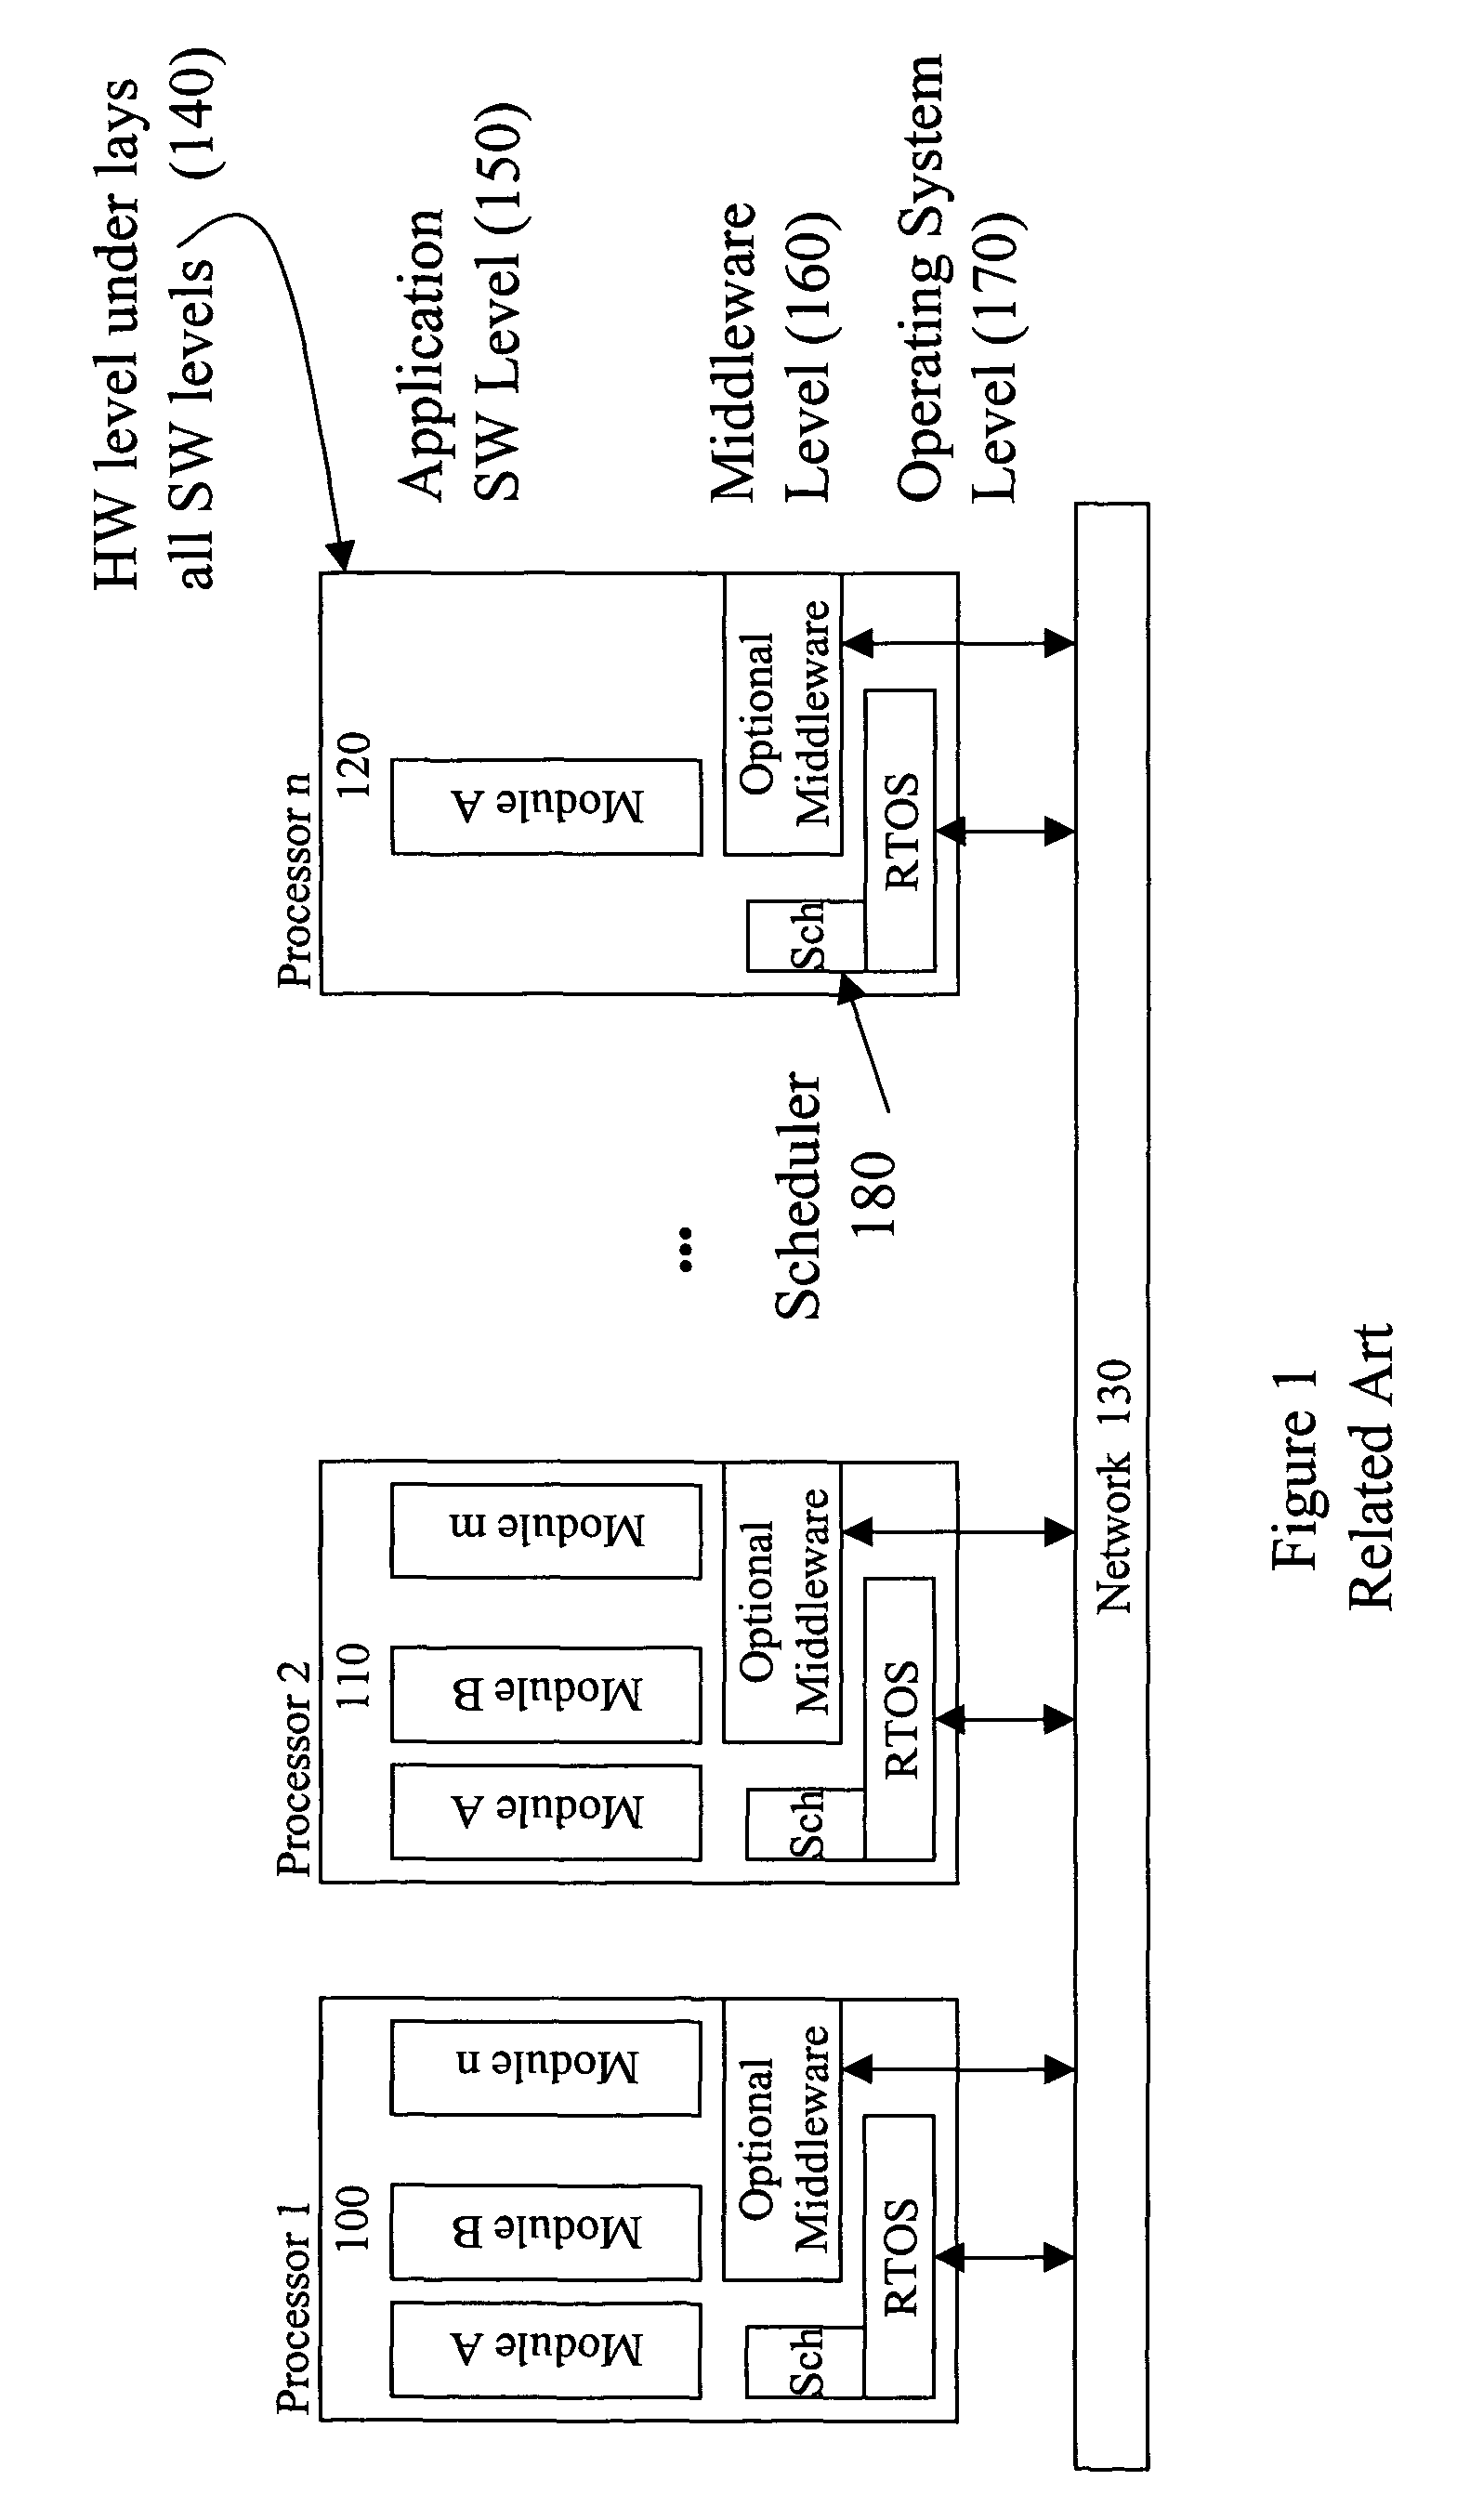 System and method for implementing distributed priority inheritance